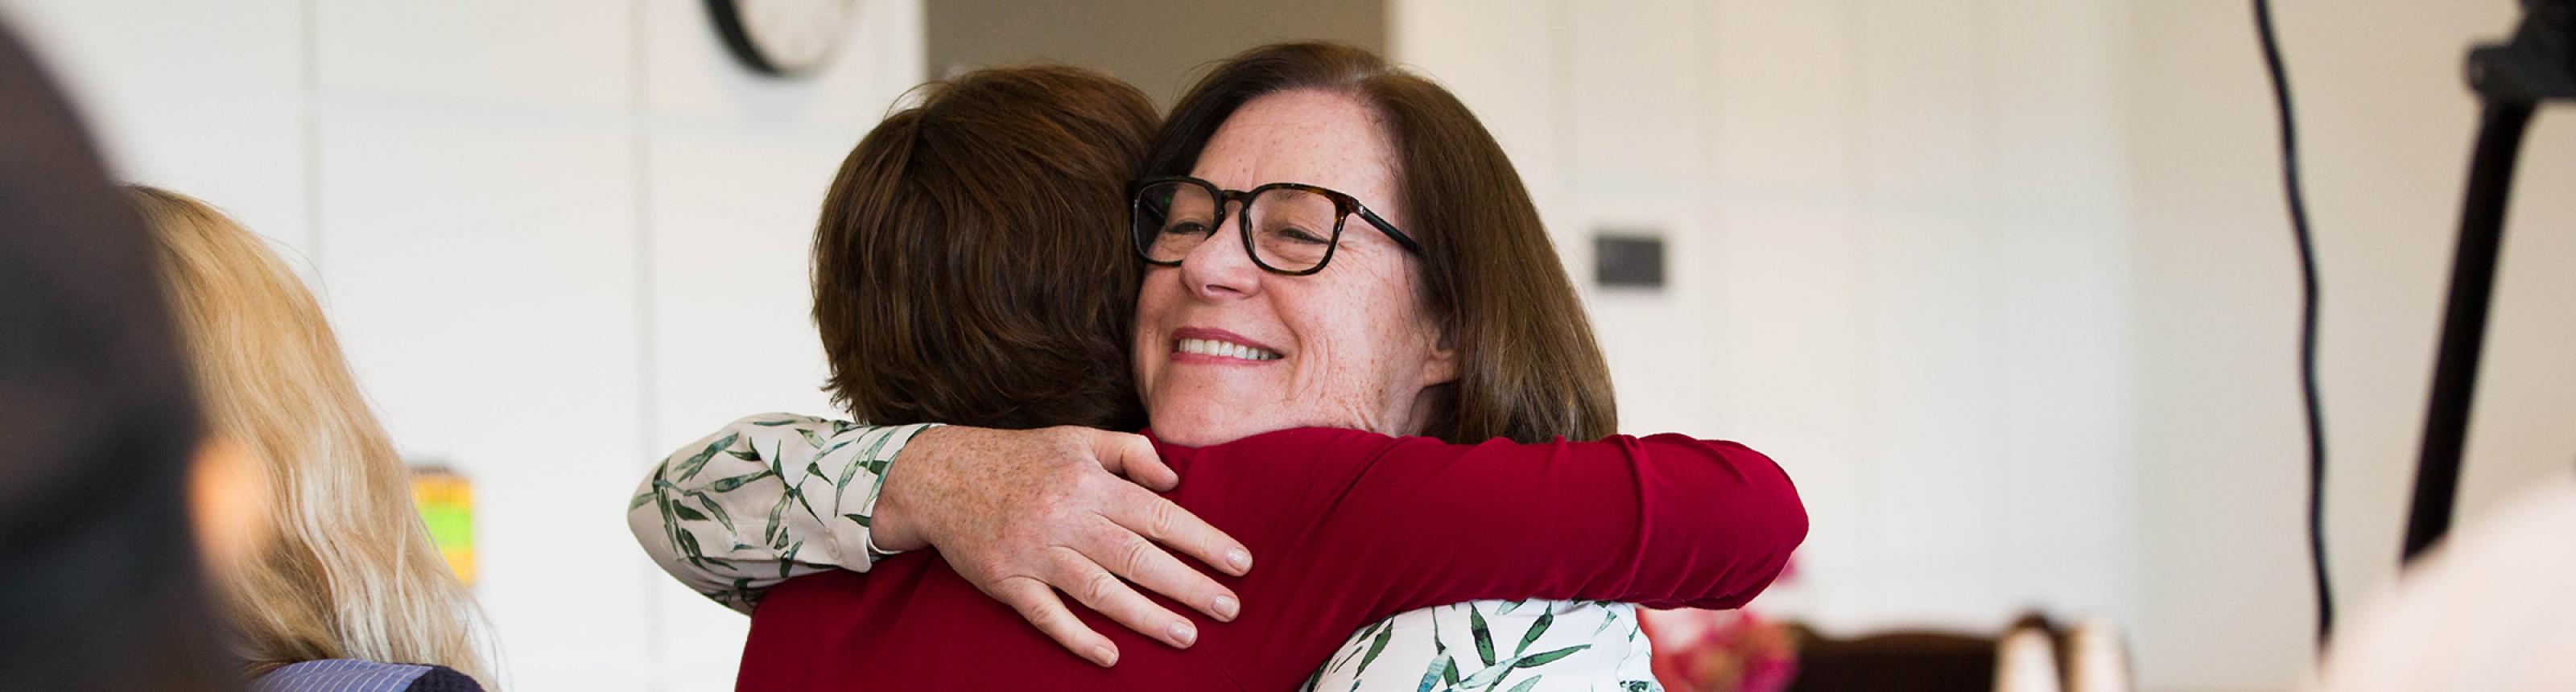 Hugging at the annual UCSF Caregiver Program Retreat